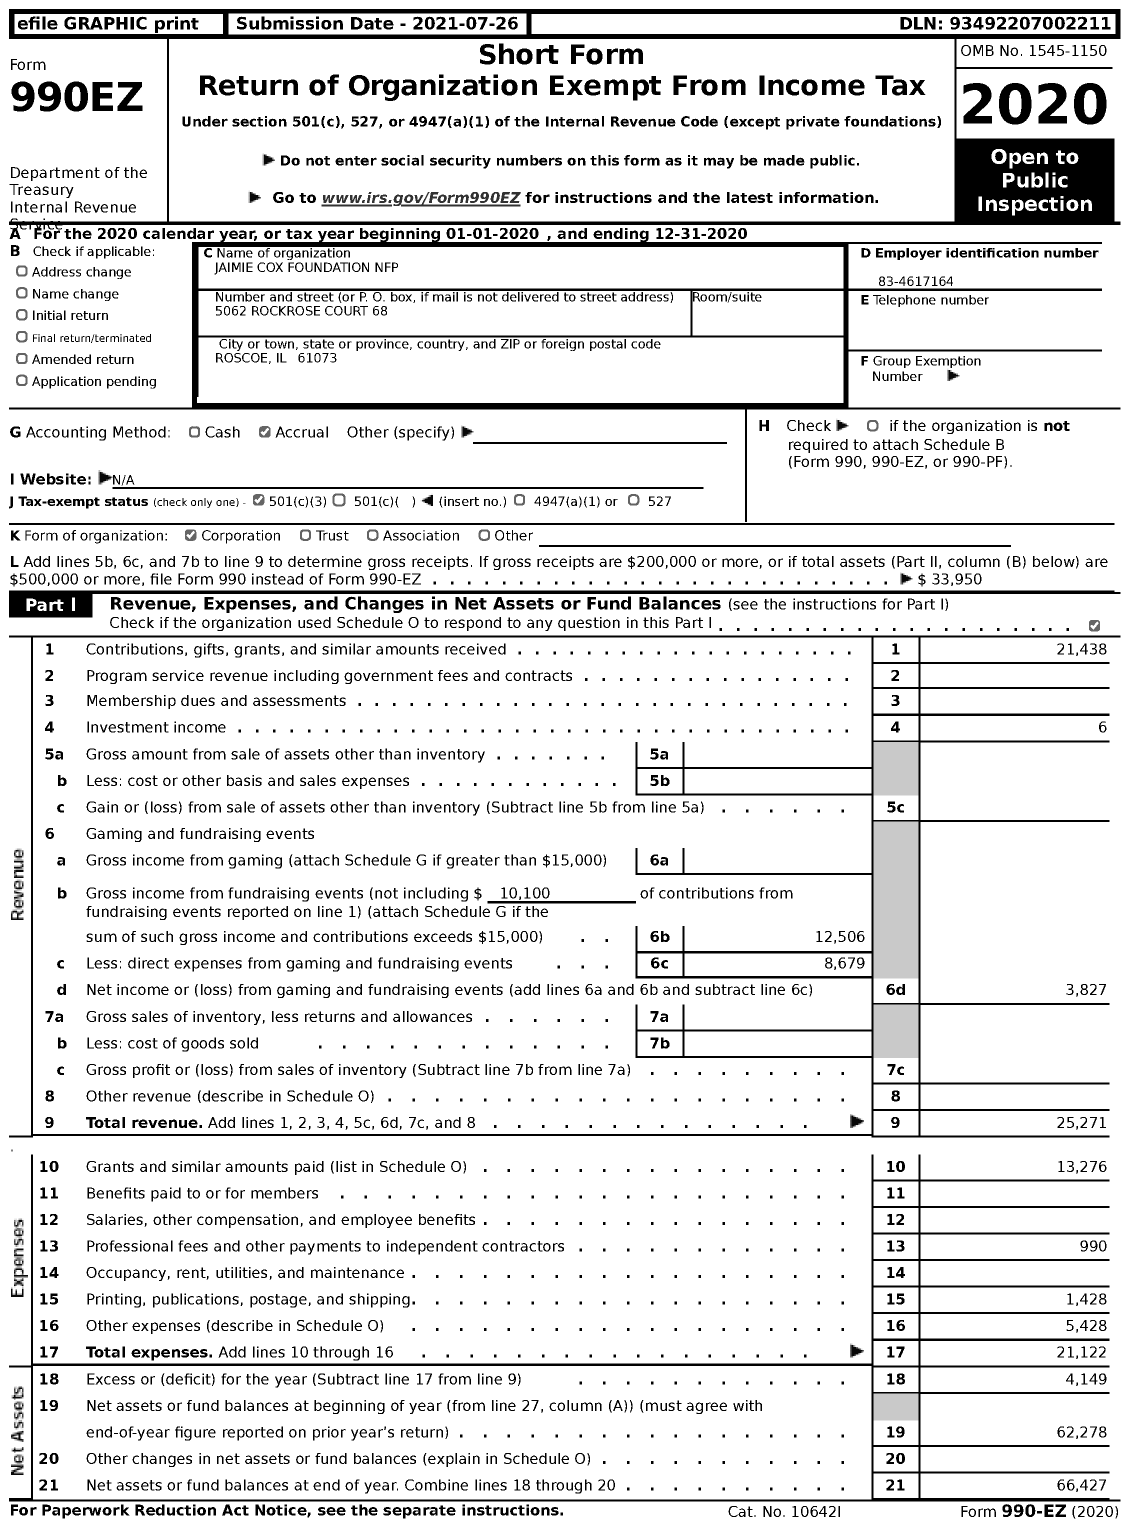 Image of first page of 2020 Form 990EZ for Jaimie Cox Foundation NFP